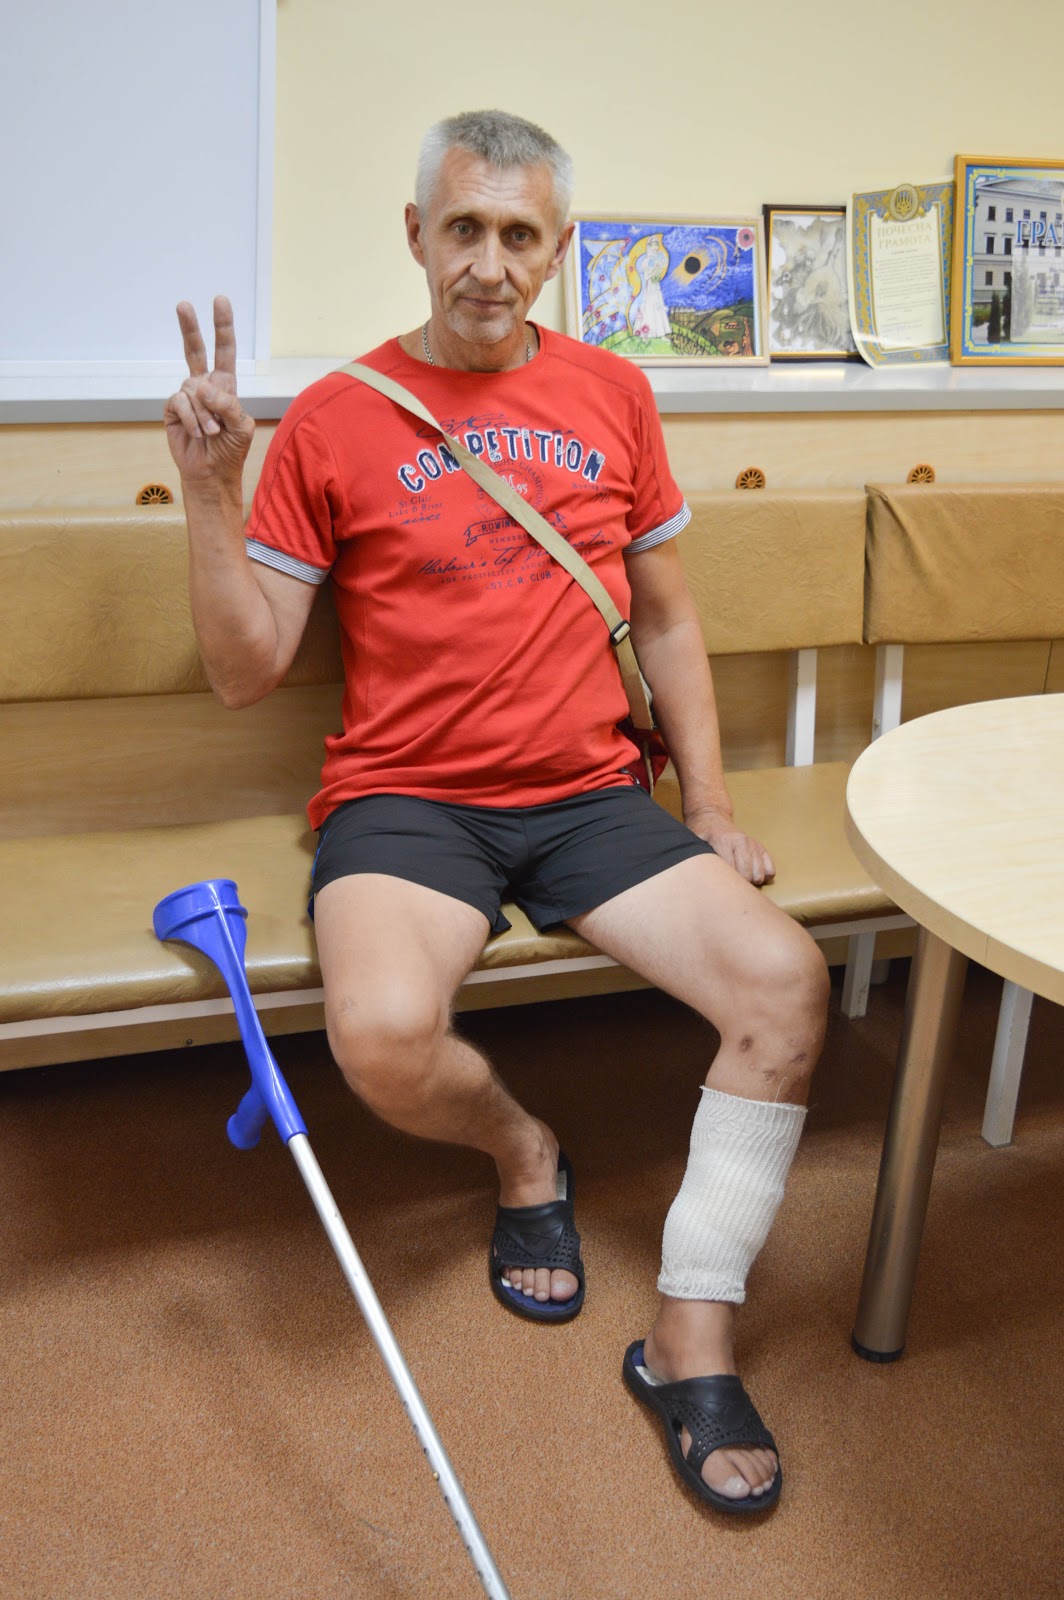 Serhiy, 53 years old, from the Donetsk Oblast, was wounded near Ilovaisk in August 2014. He has been receiving treatment in the Mechnikov Hospital since then. He is missing 10 centimeters of the bone in his leg. ~